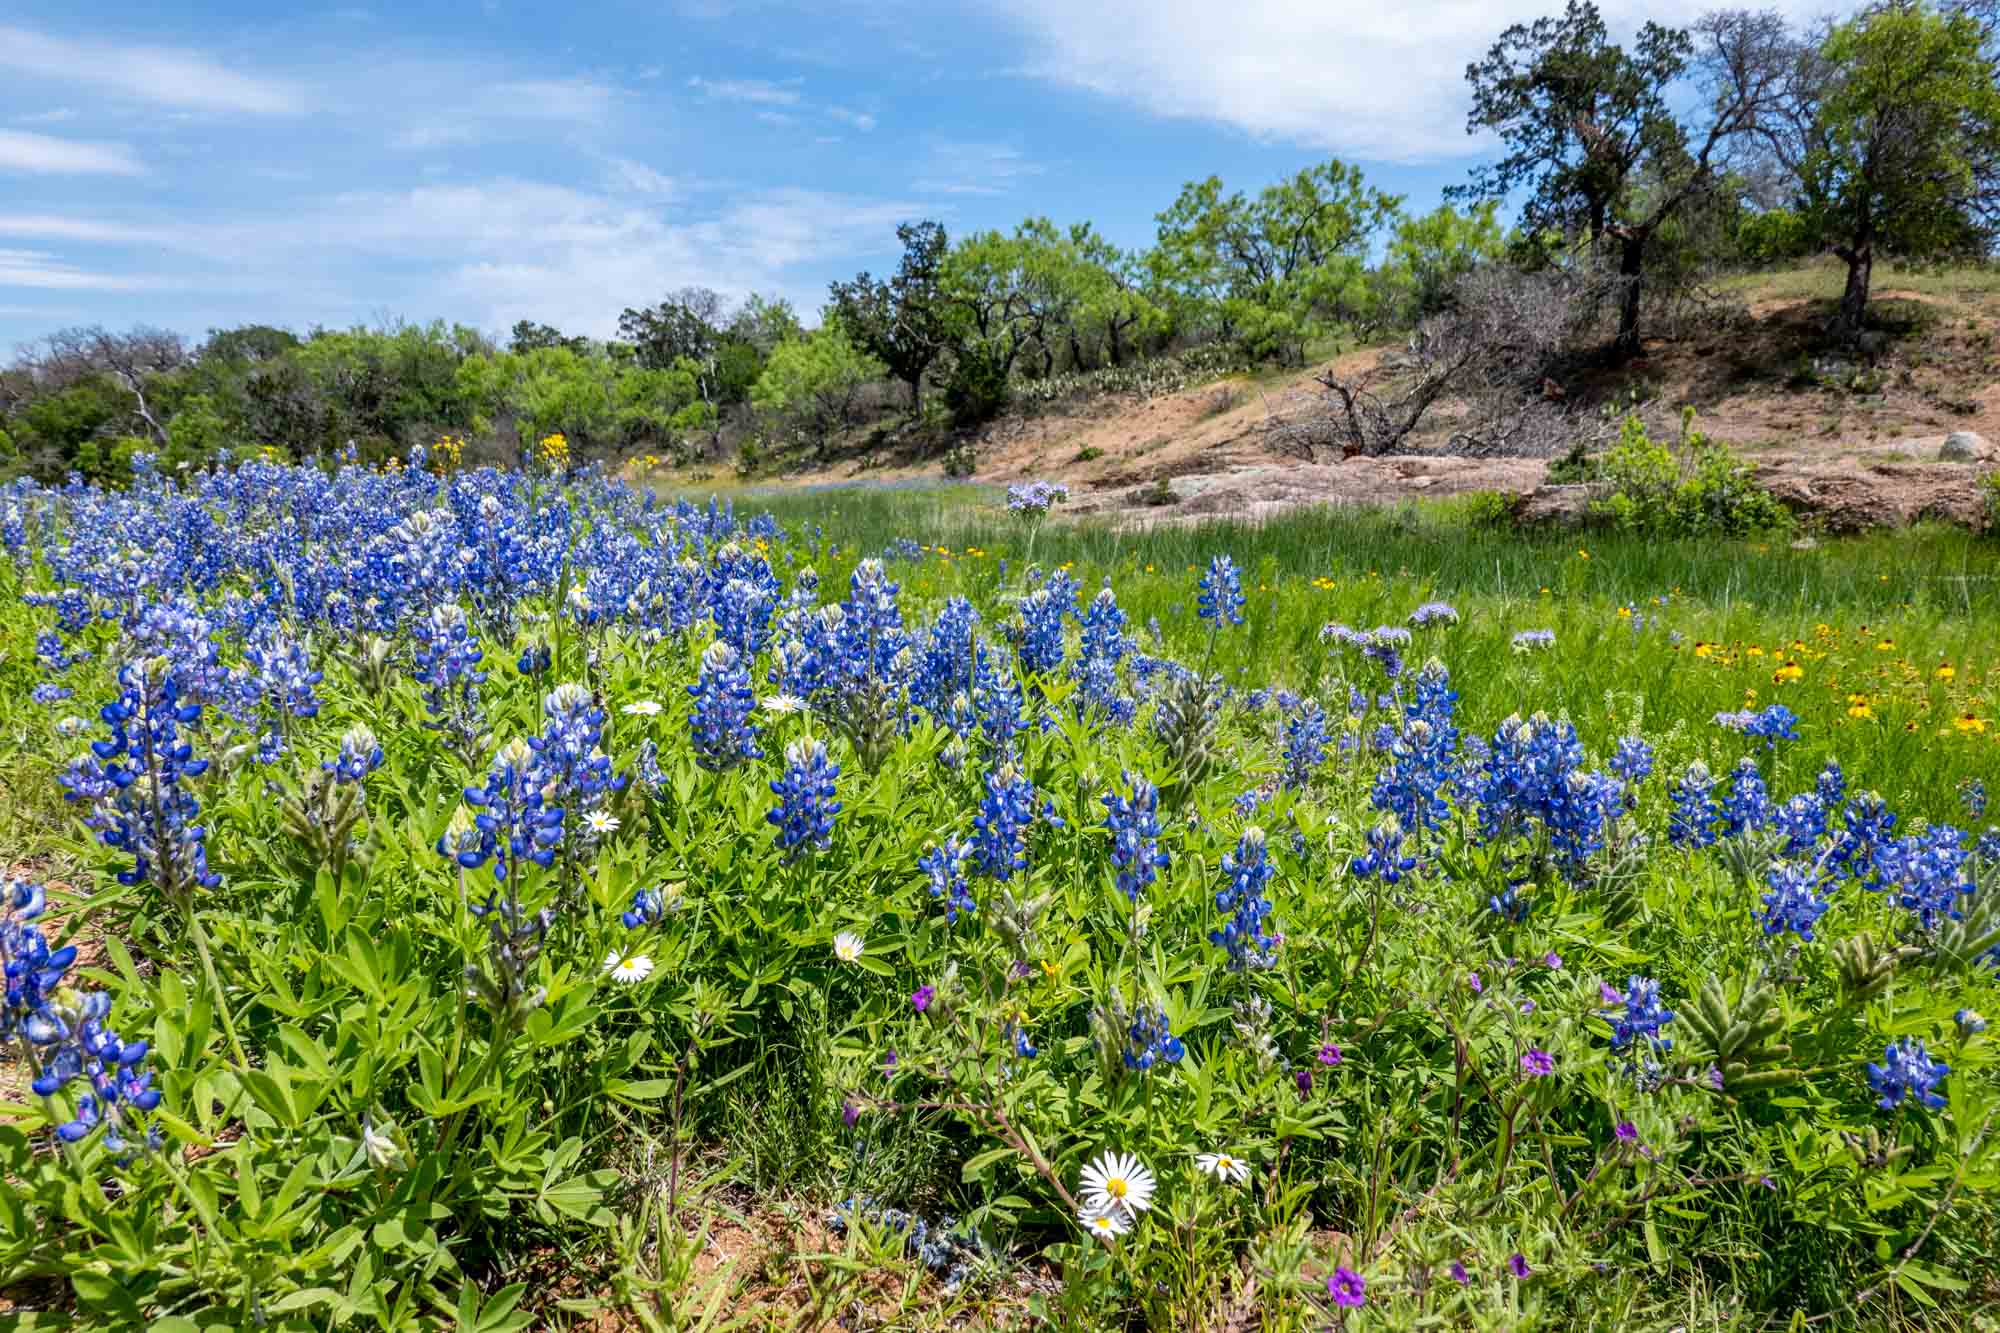 The Willow City Loop bluebonnets in bloom.